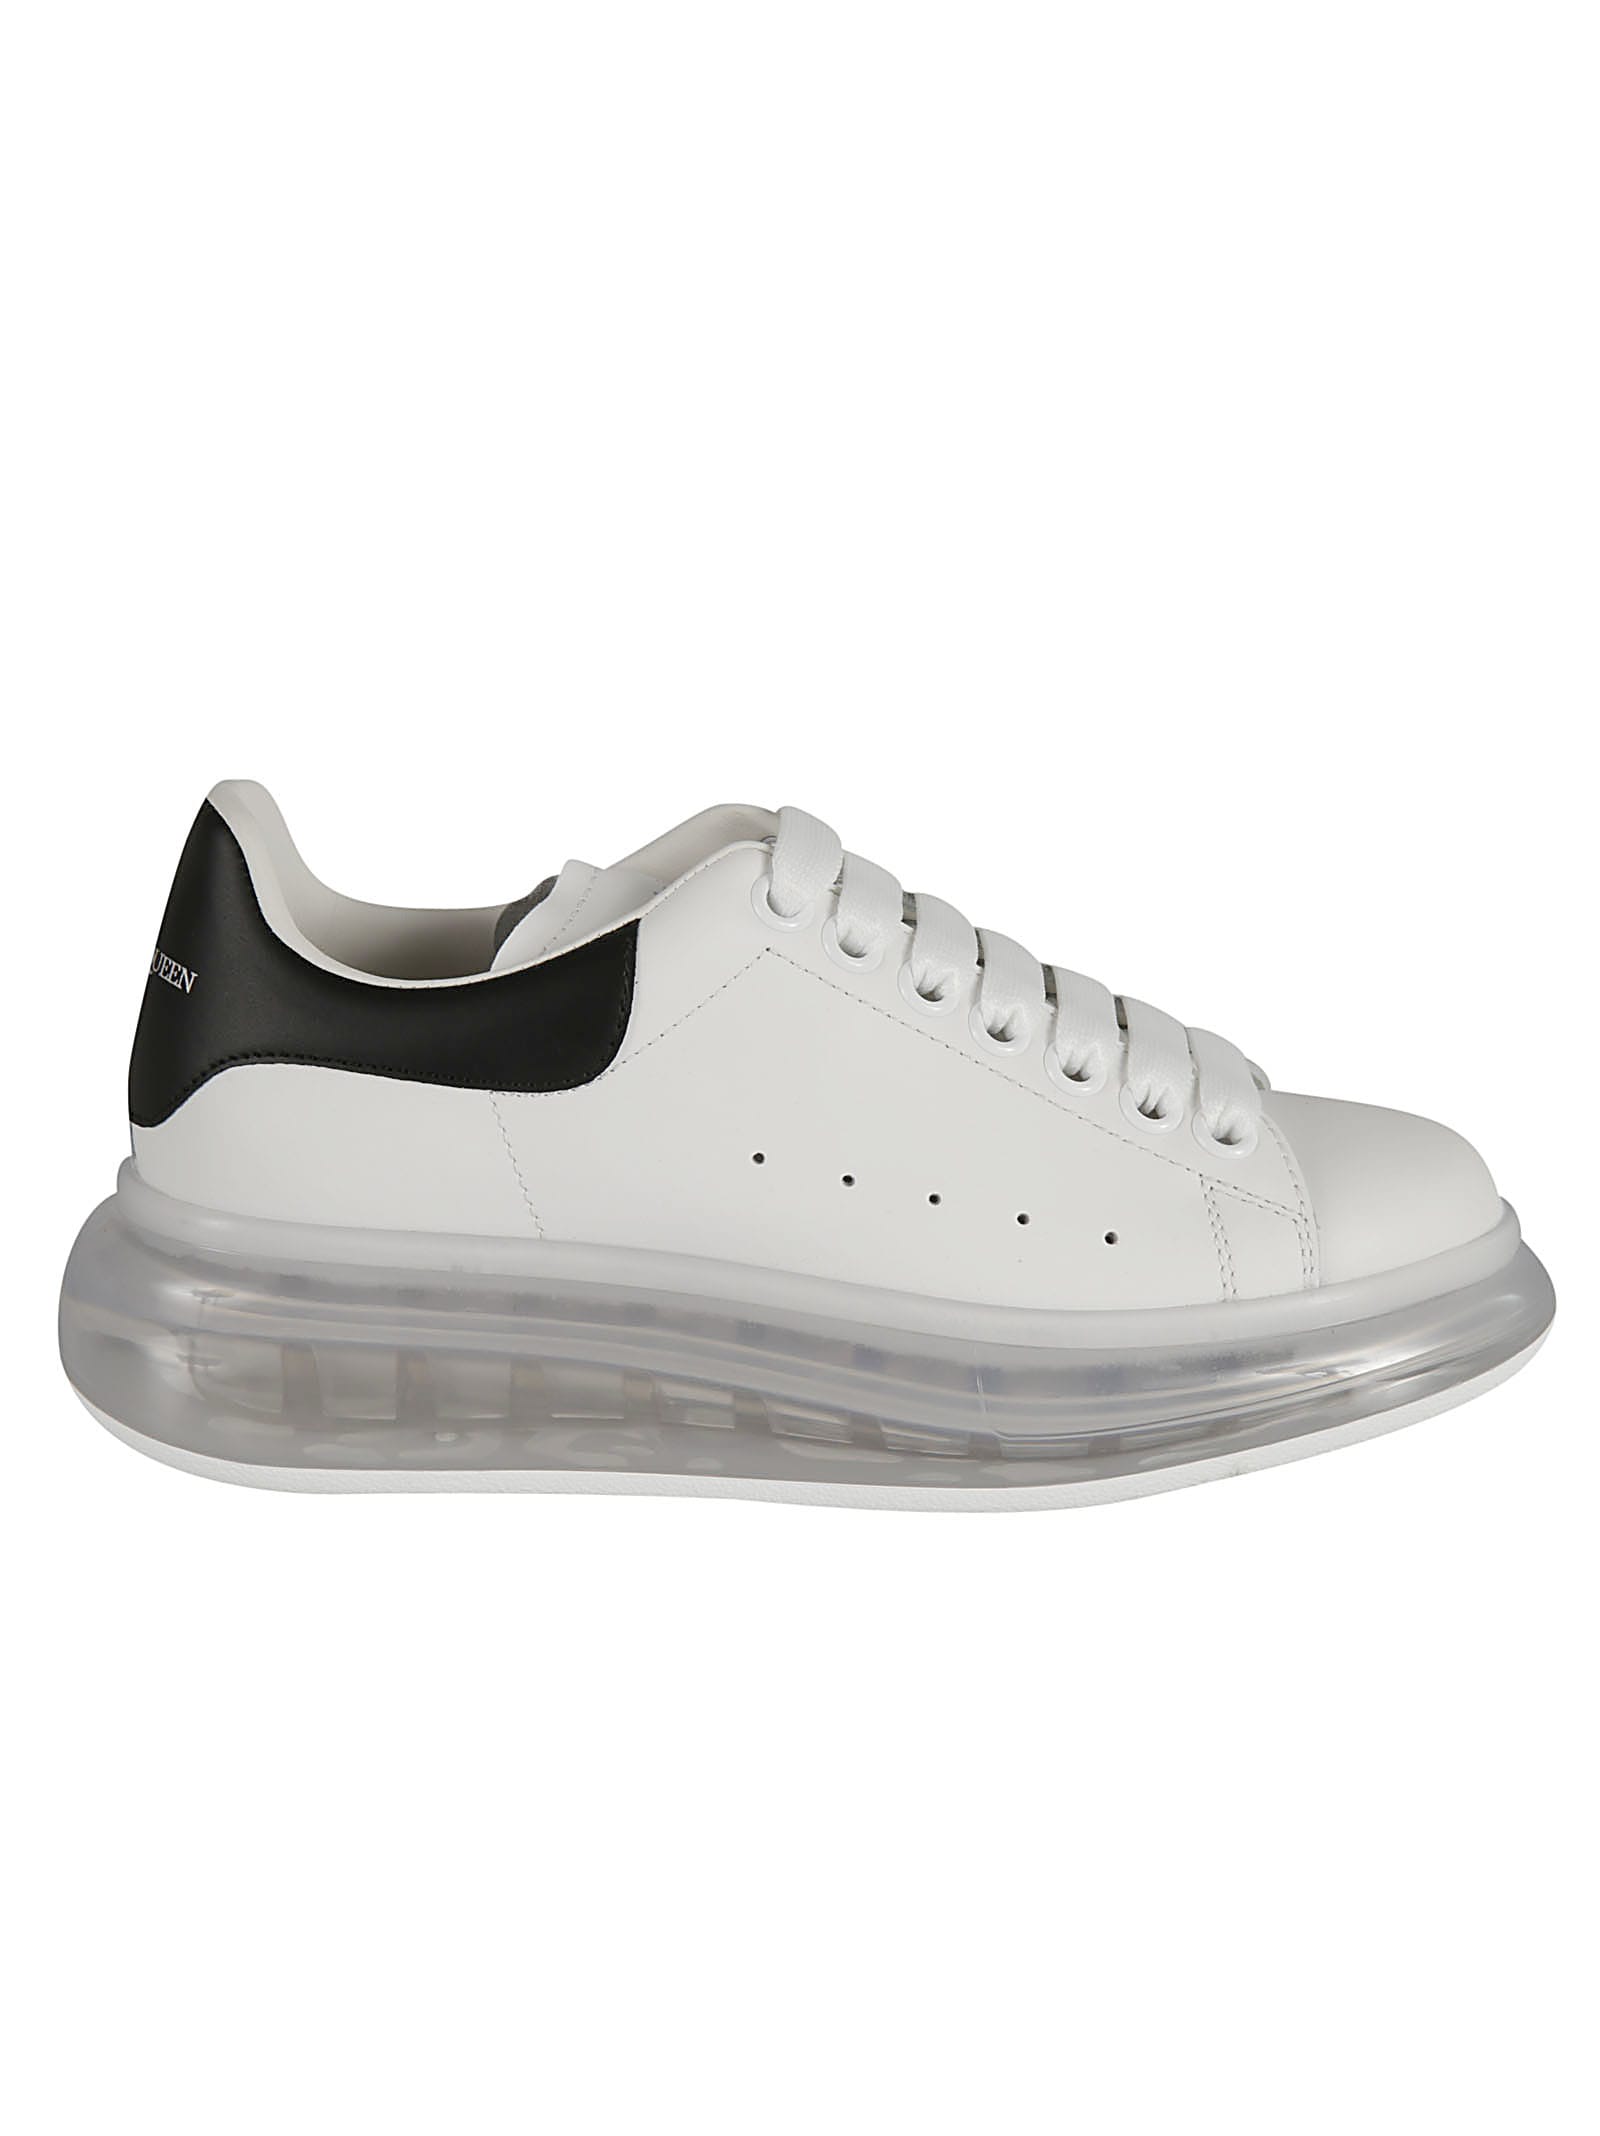 ALEXANDER MCQUEEN PERFORATED LOGO SNEAKERS,611698WHX98 9061 WHITE BLACK